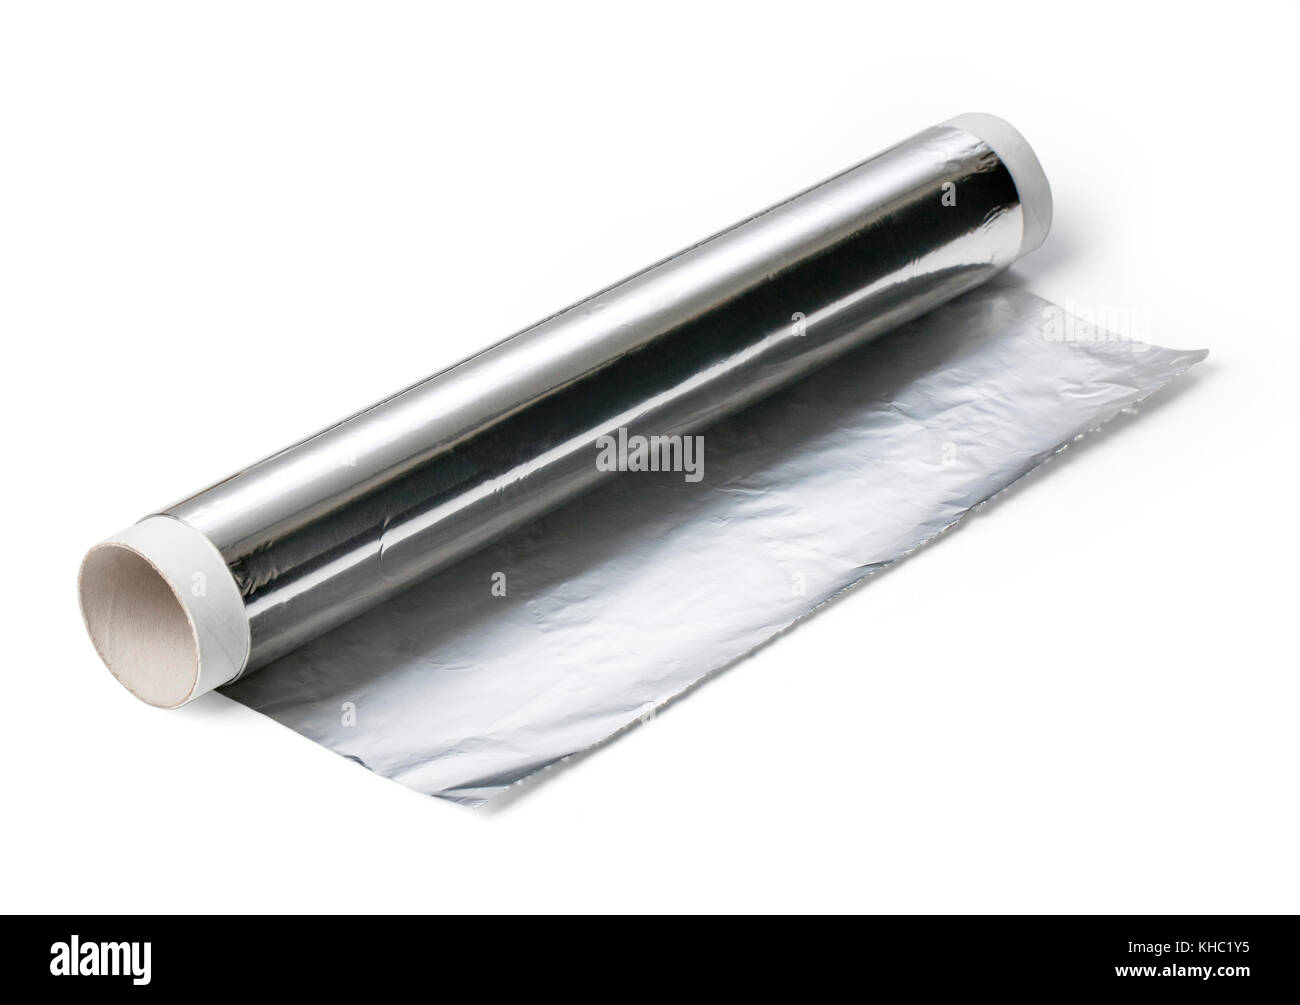 Four different roll of aluminum foil for food storage and cooking, isolated  image on white background. Foil rolls of different size: length and thickn  Stock Photo - Alamy